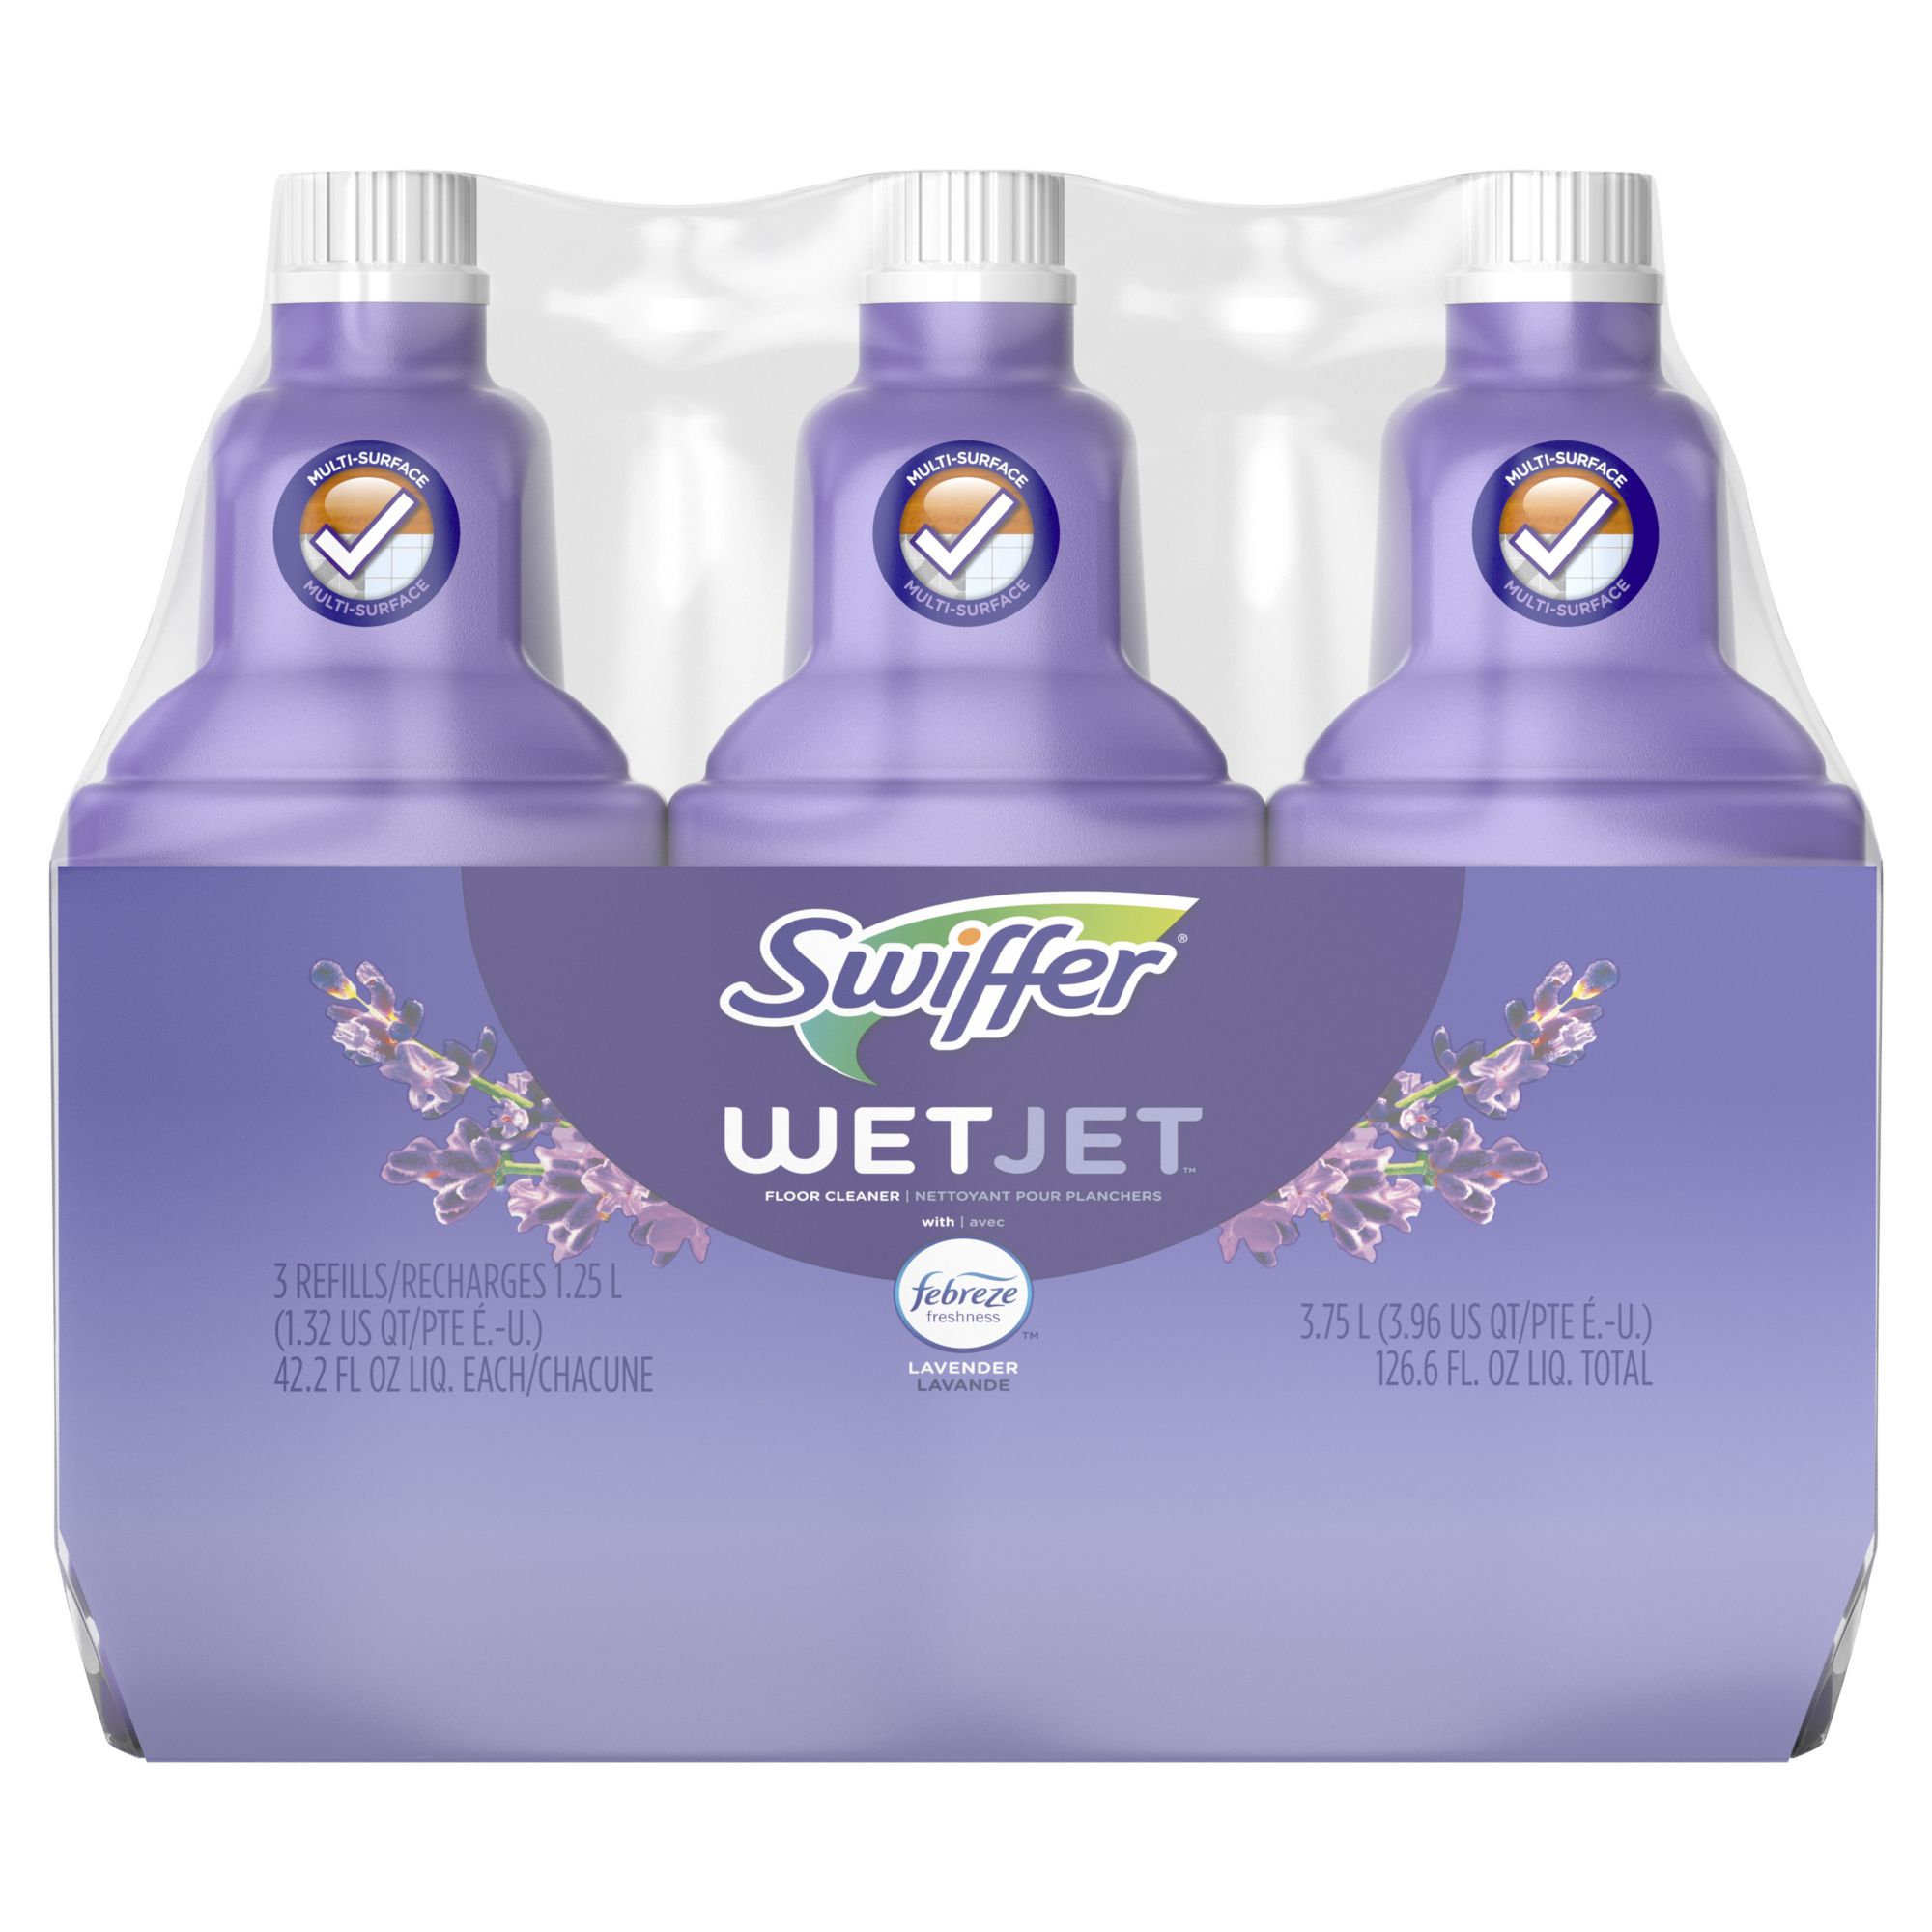 Swiffer® PowerMop Floor Cleaning Solution with Fresh Scent